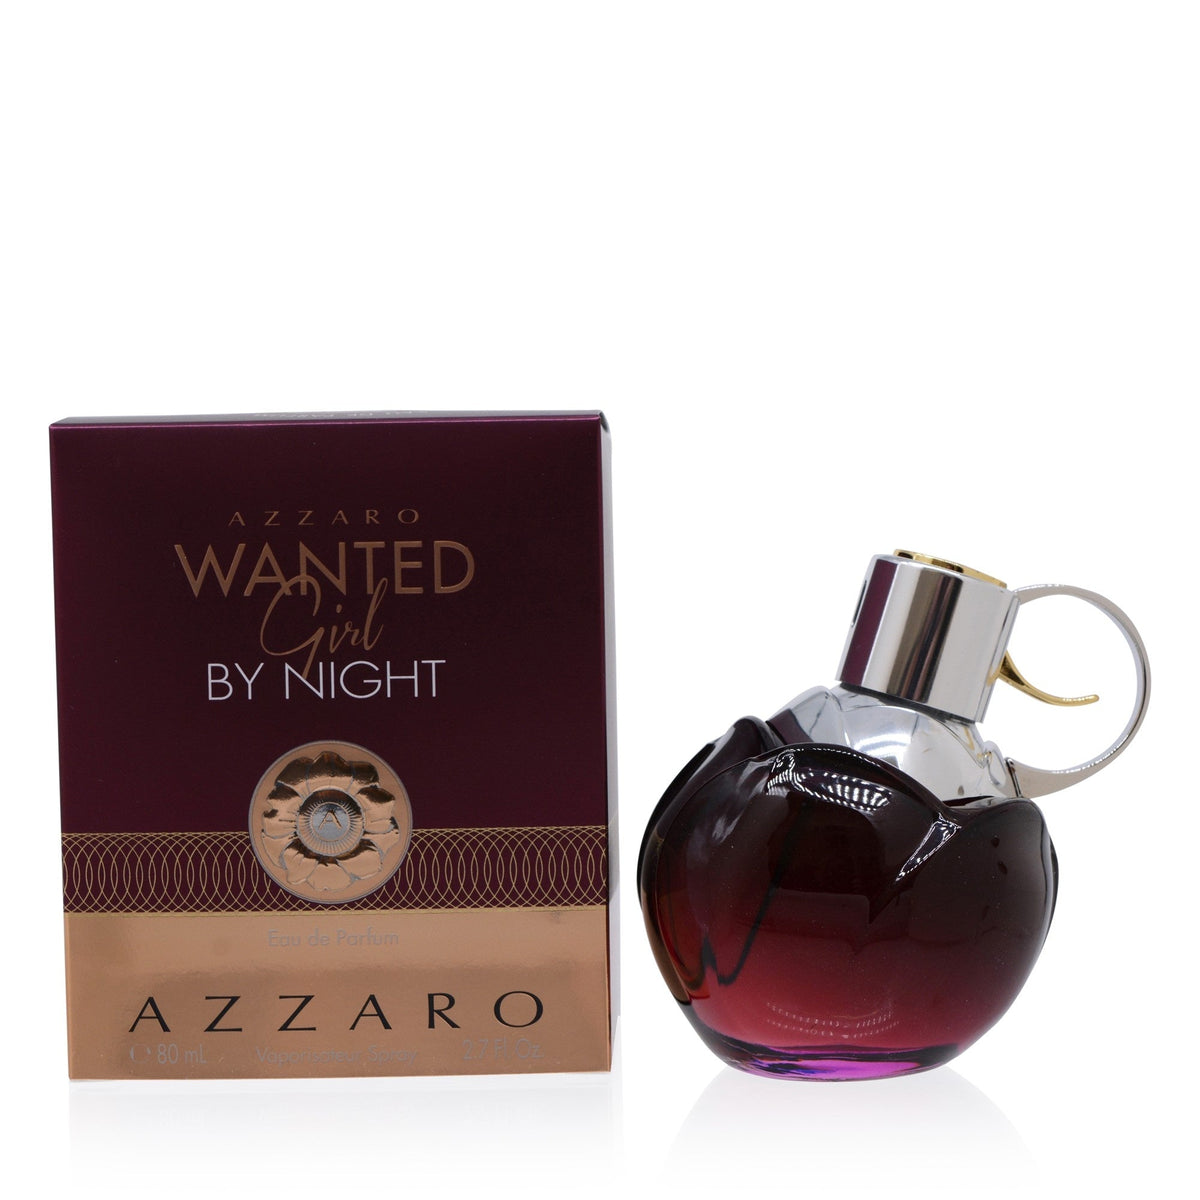 Wanted Girl By Night Azzaro Edp Spray 2.8 Oz (70 Ml) For Women  LC845300